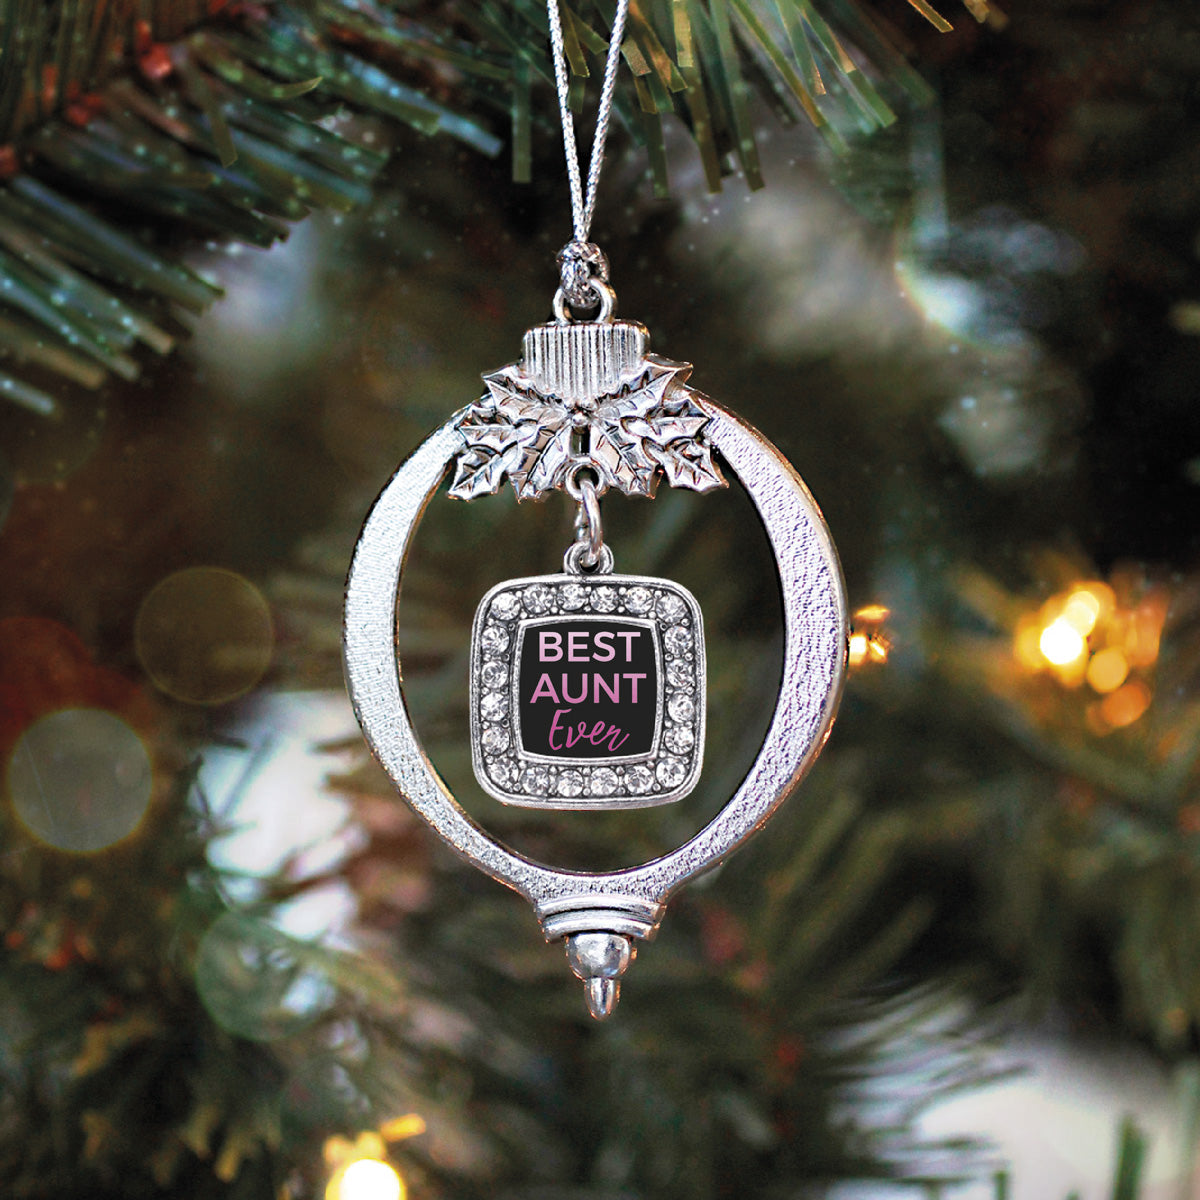 Best Aunt Ever Square Charm Christmas / Holiday Ornament